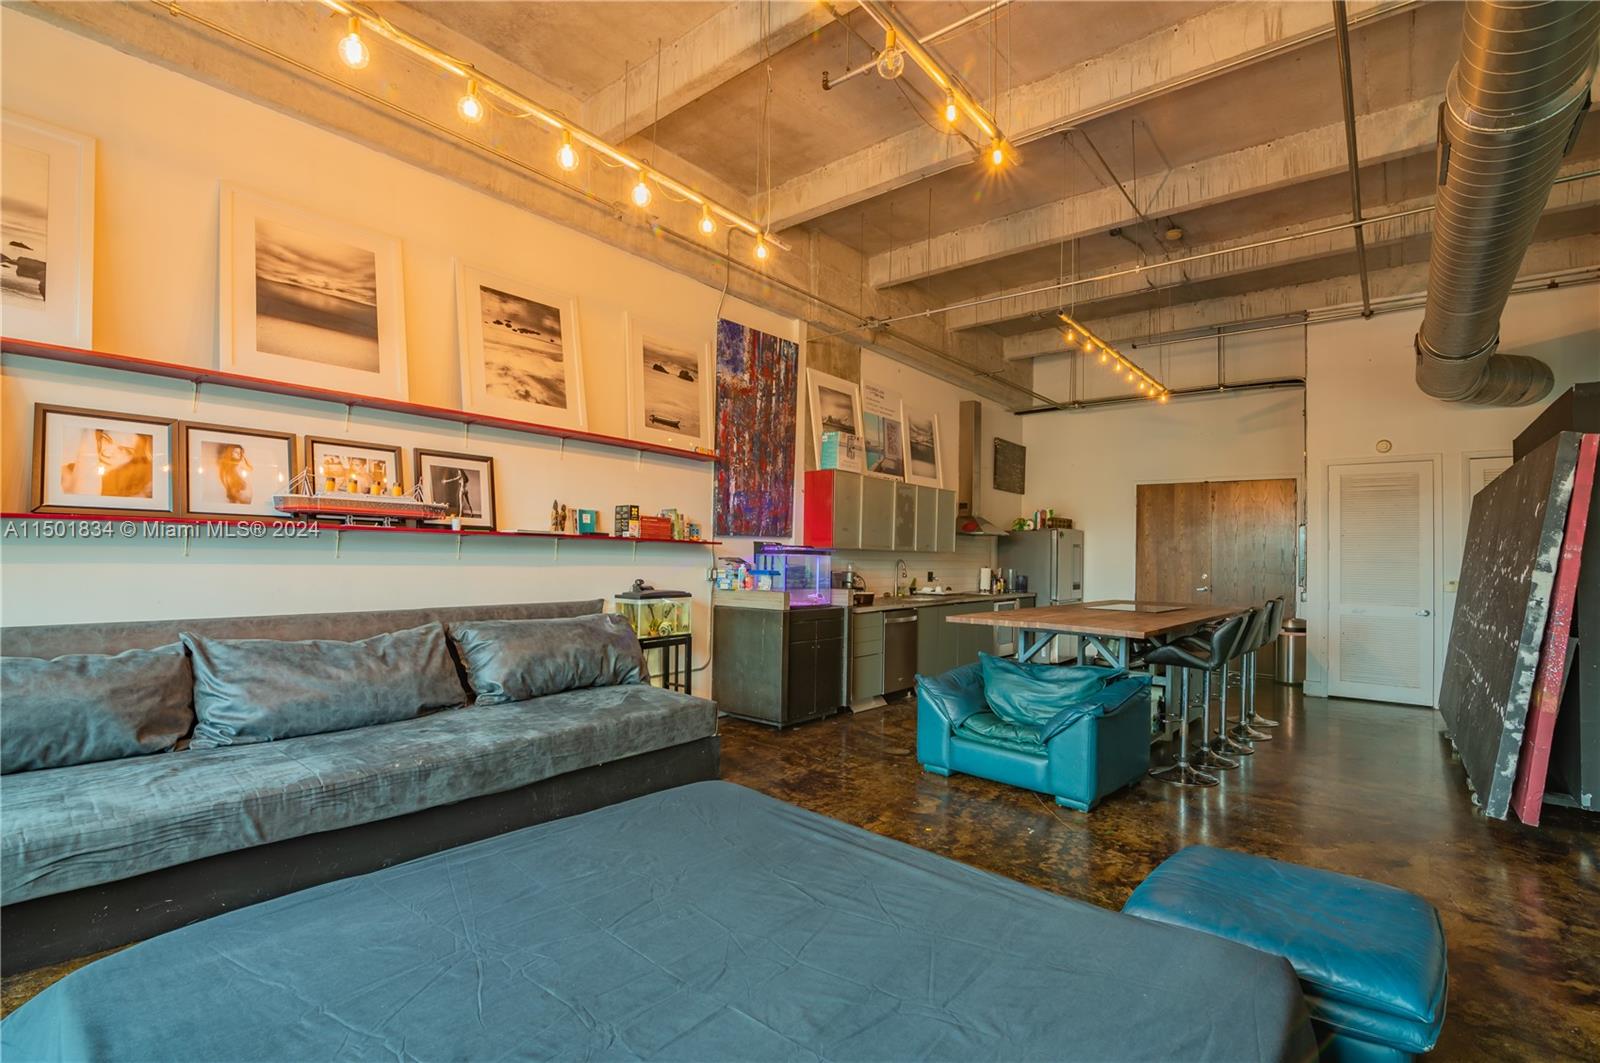 Gorgeous NYC style loft that offers 15ft ceilings, cement floor and an amazing open space! All new appliances and a built-in sleeping loft!Washer/Dryer in the unit, Central AC & spacious balcony!  Close to museums, shops and best dining.  This is a must see property in the best part of miami!  Building offers 24hr concierge, fitness room and a pool.